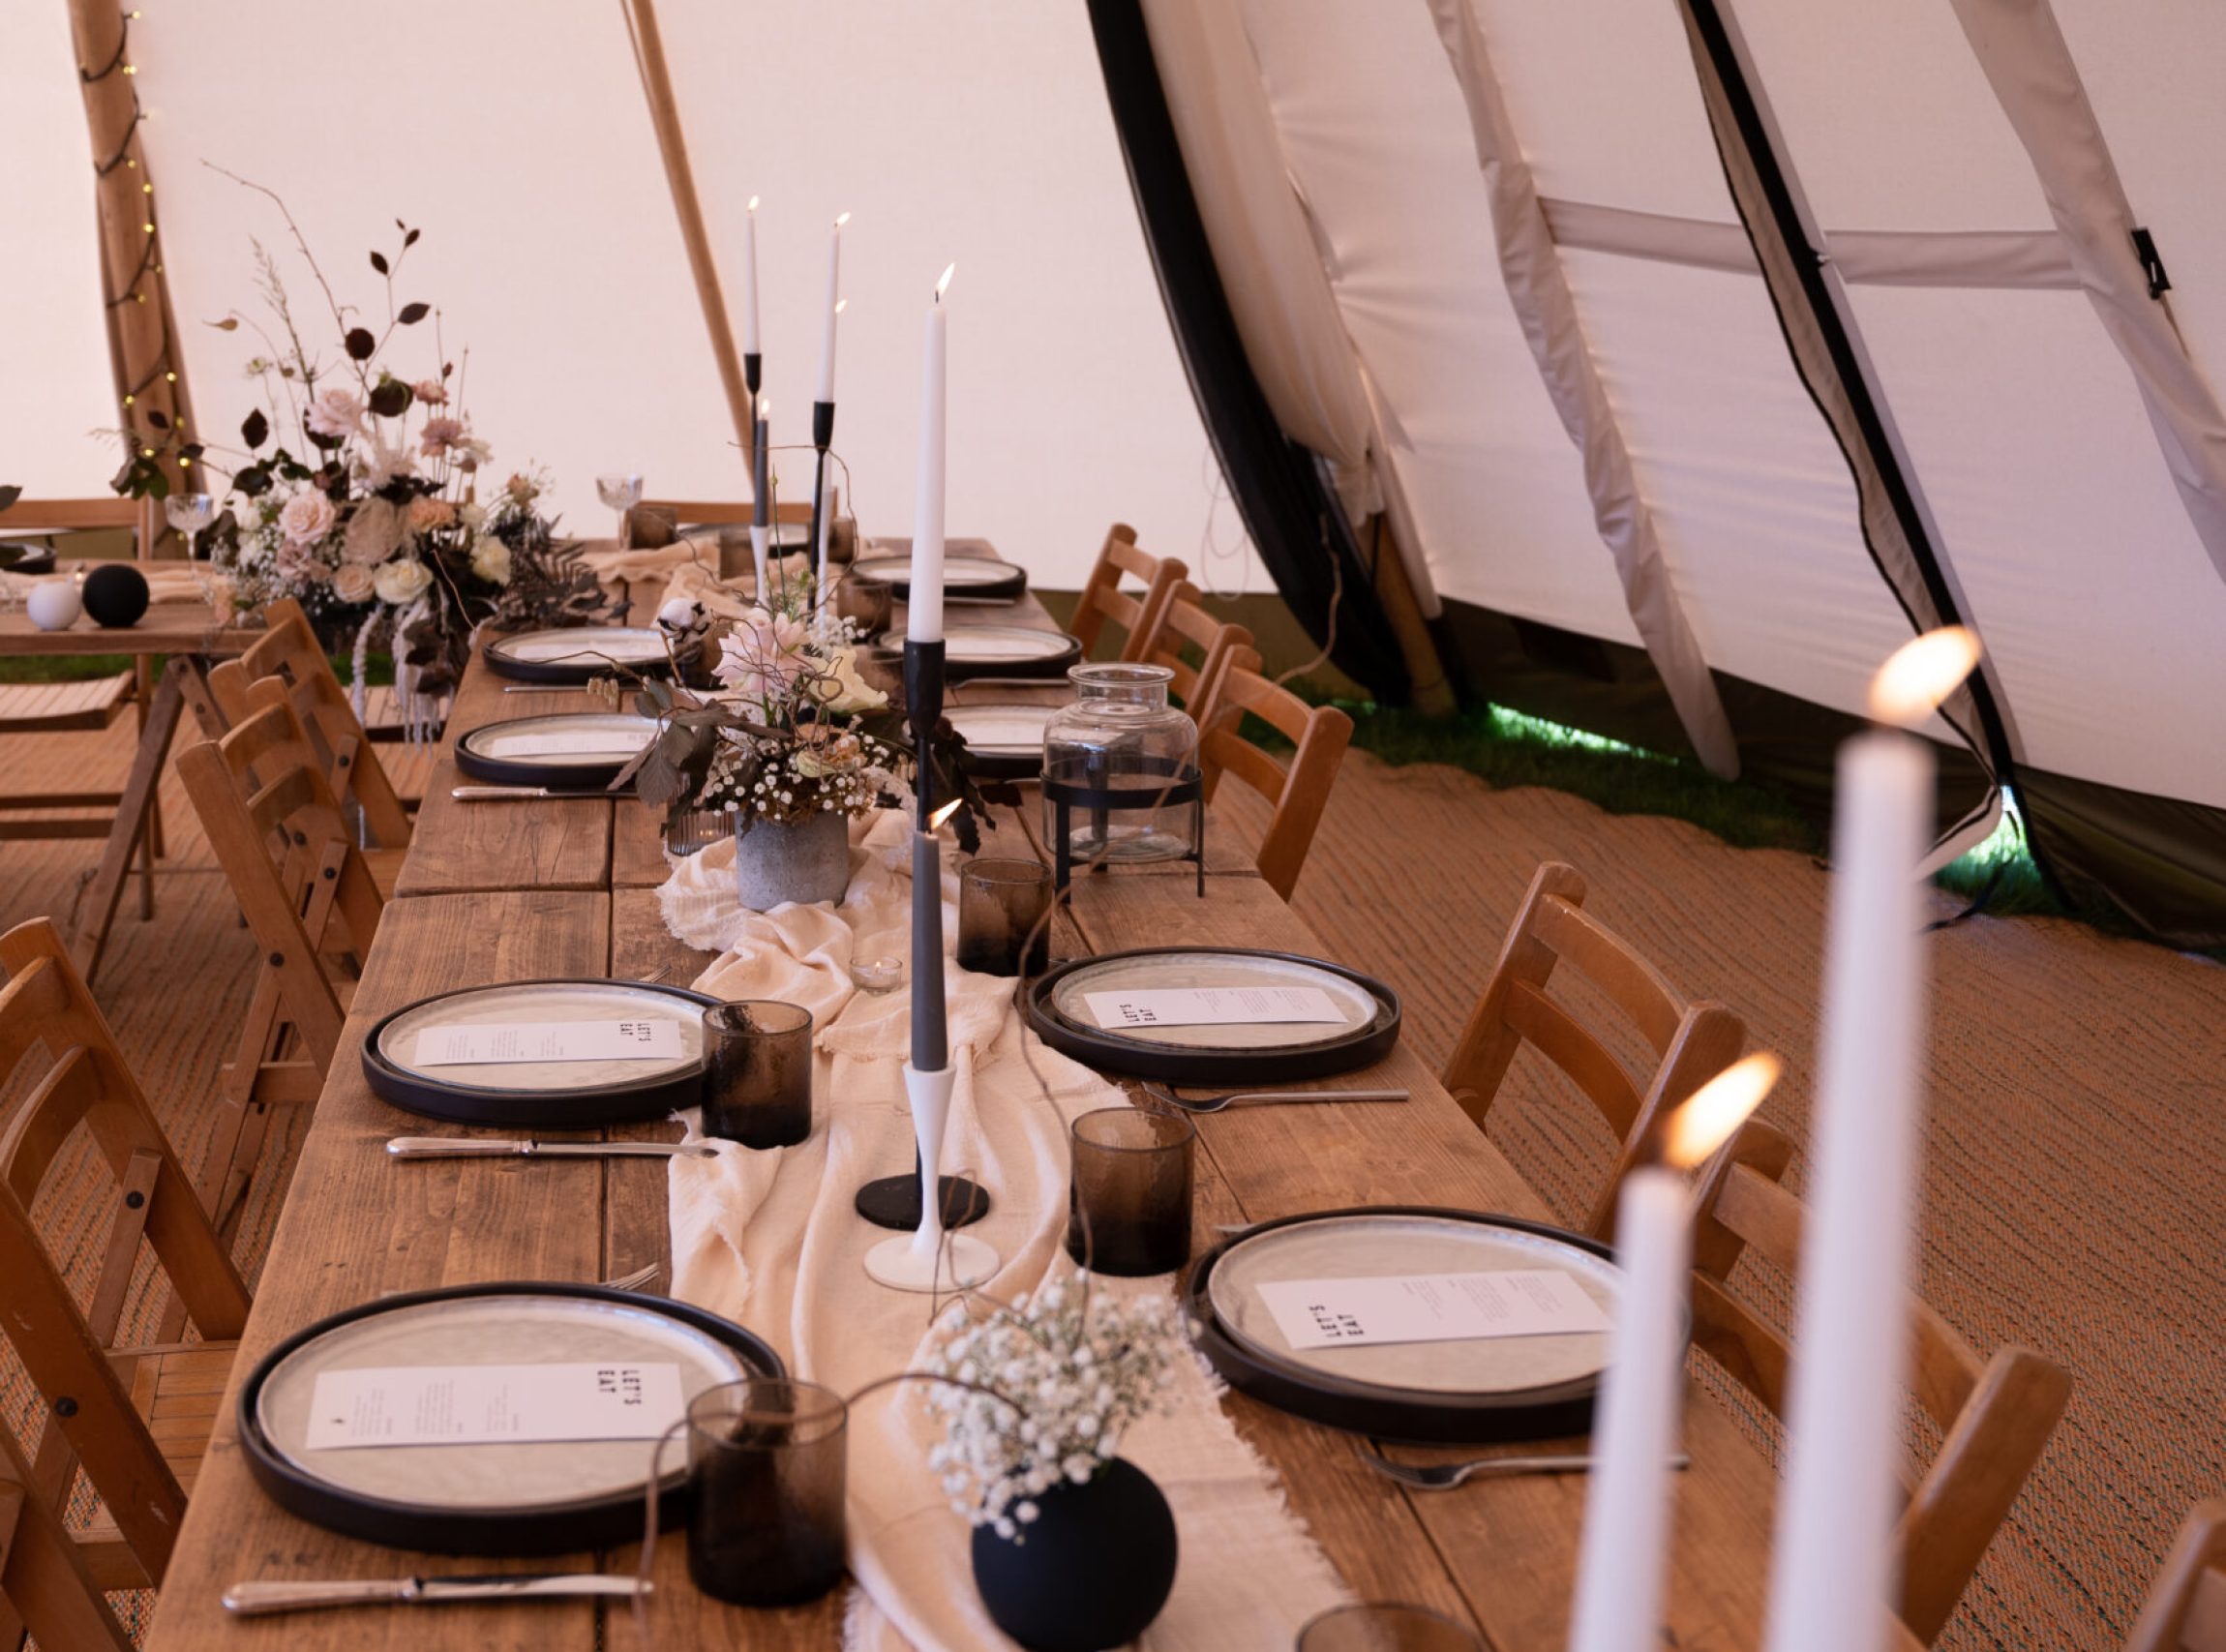 A black and white wedding menu tables cape with beige décor displayed on a table inside a tipi at Deer Farm Tipi Weddings near Exeter. The wooden table features a beige tablecloth, modern black and grey plates with a black and white floral accent and candles.